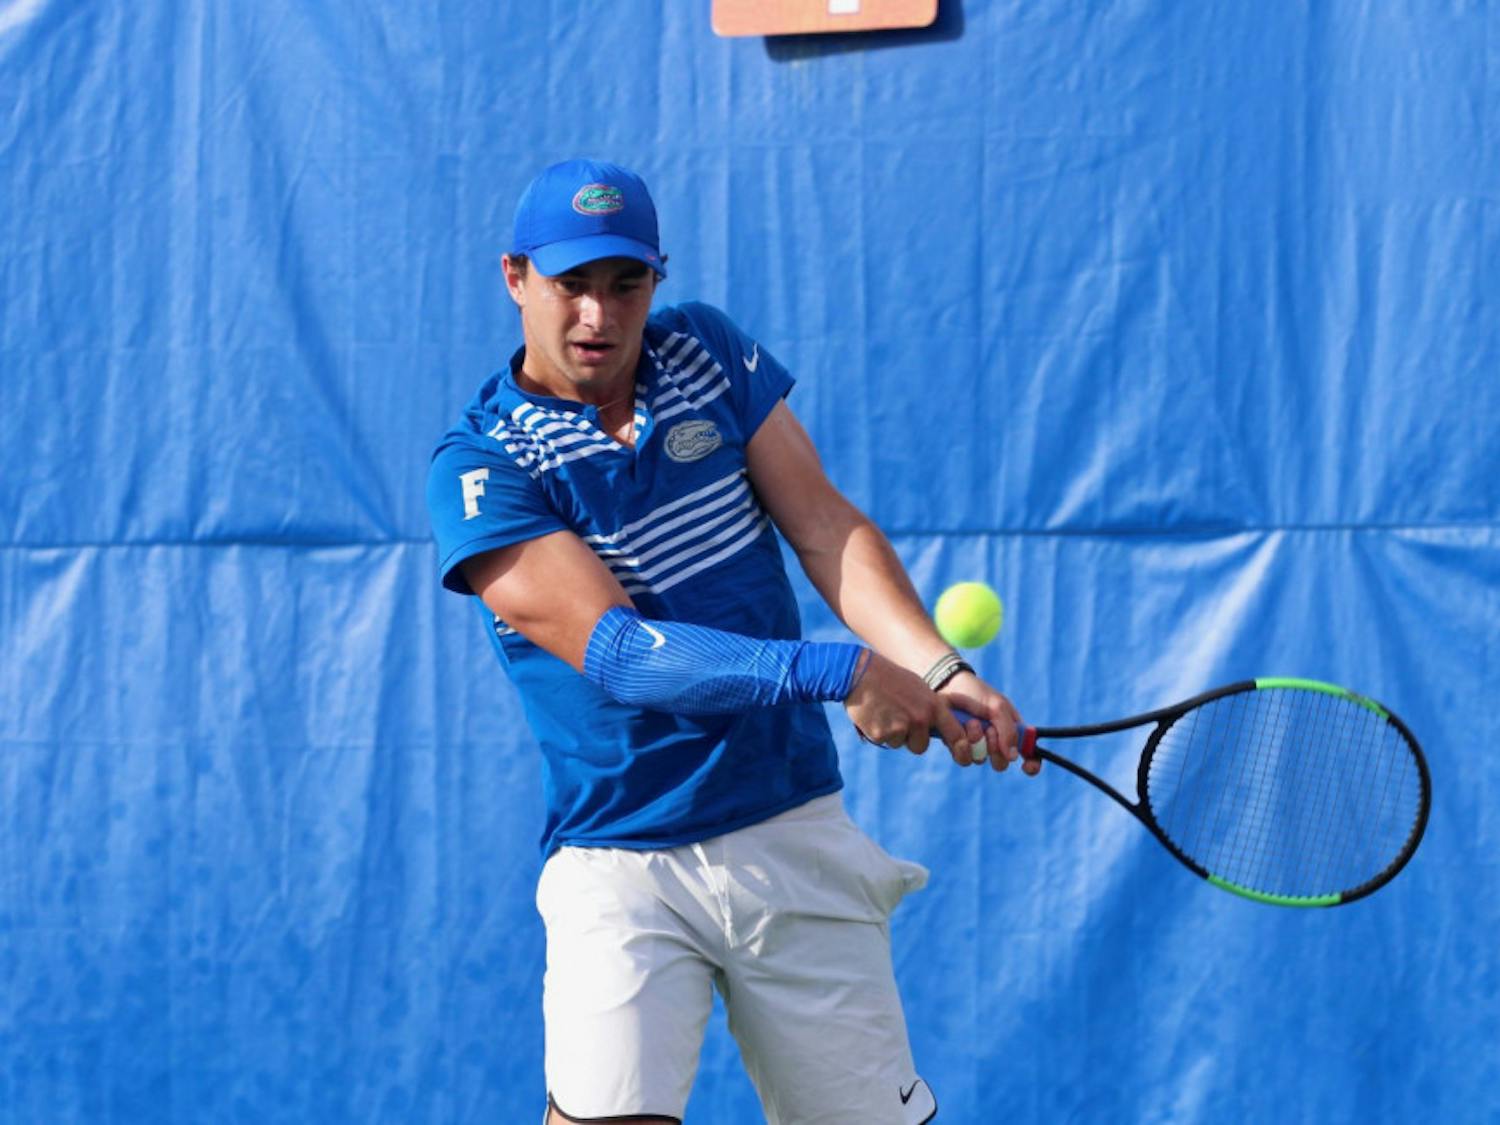 Sophomore Duarte Vale got a 6-4, 6-7, 1-0 singles victory in a 10-point tiebreaker&nbsp;in Florida's win over Auburn on Sunday. He improved to 9-0 in SEC play and extended his winning streak to 10 in singles.
&nbsp;